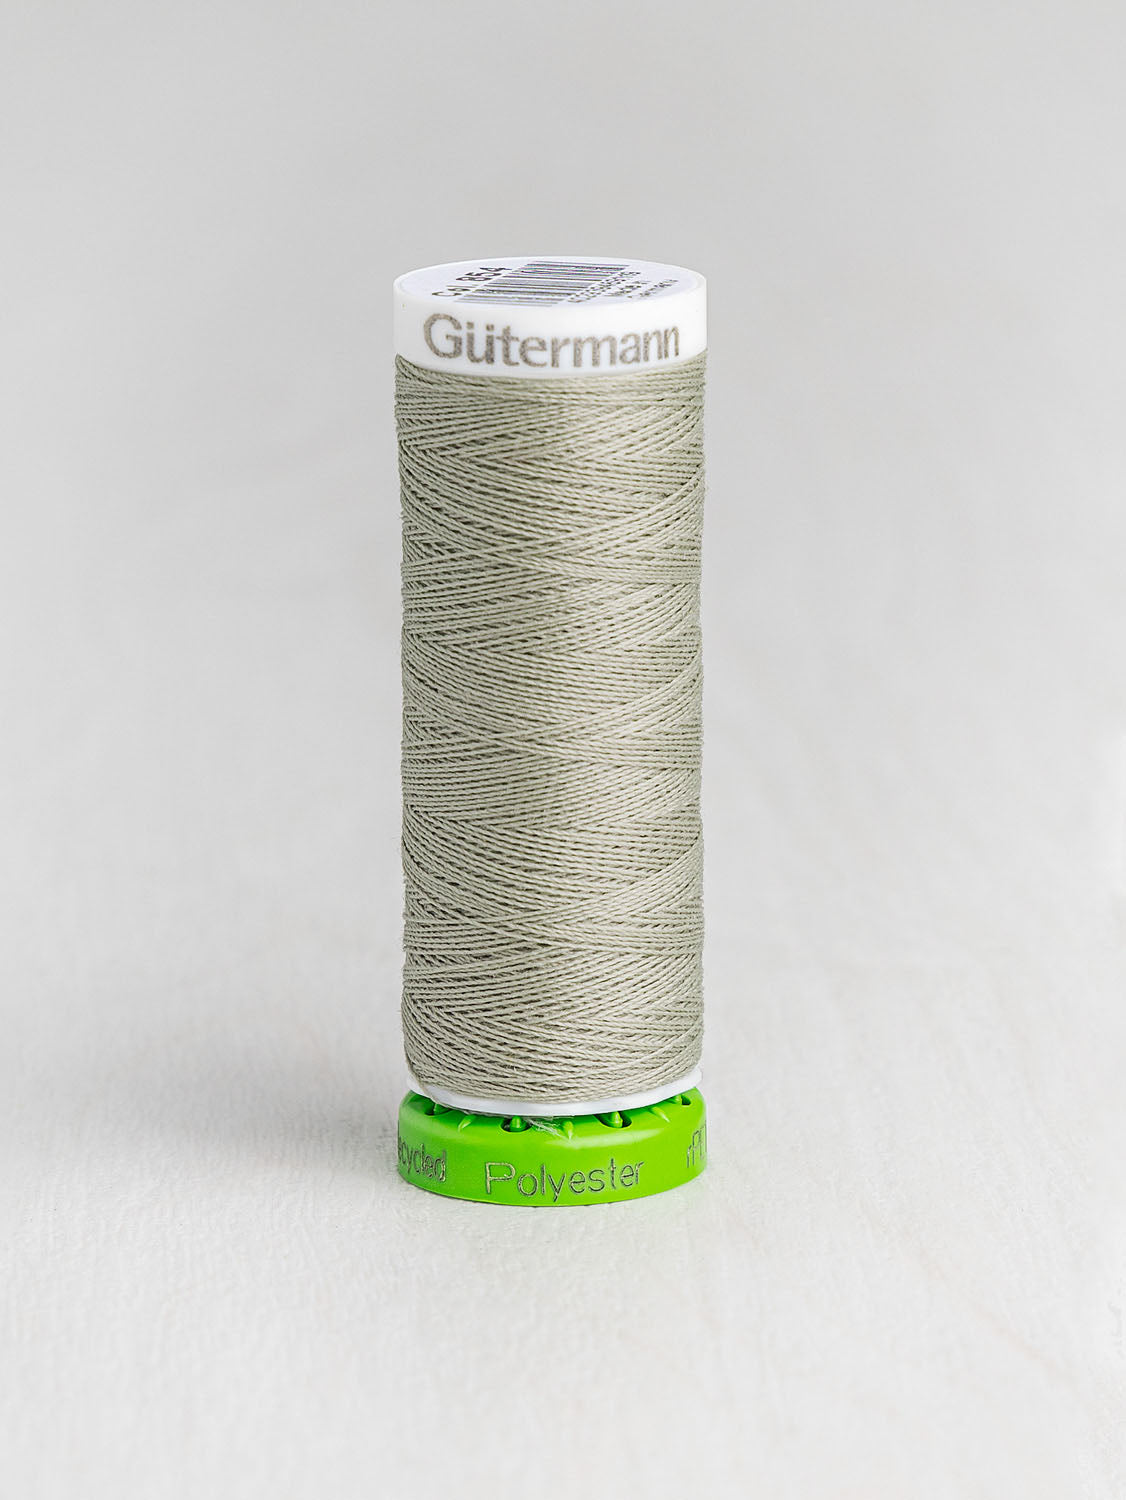 Gütermann All Purpose rPET Recycled Thread - Willow 854 | Core Fabrics